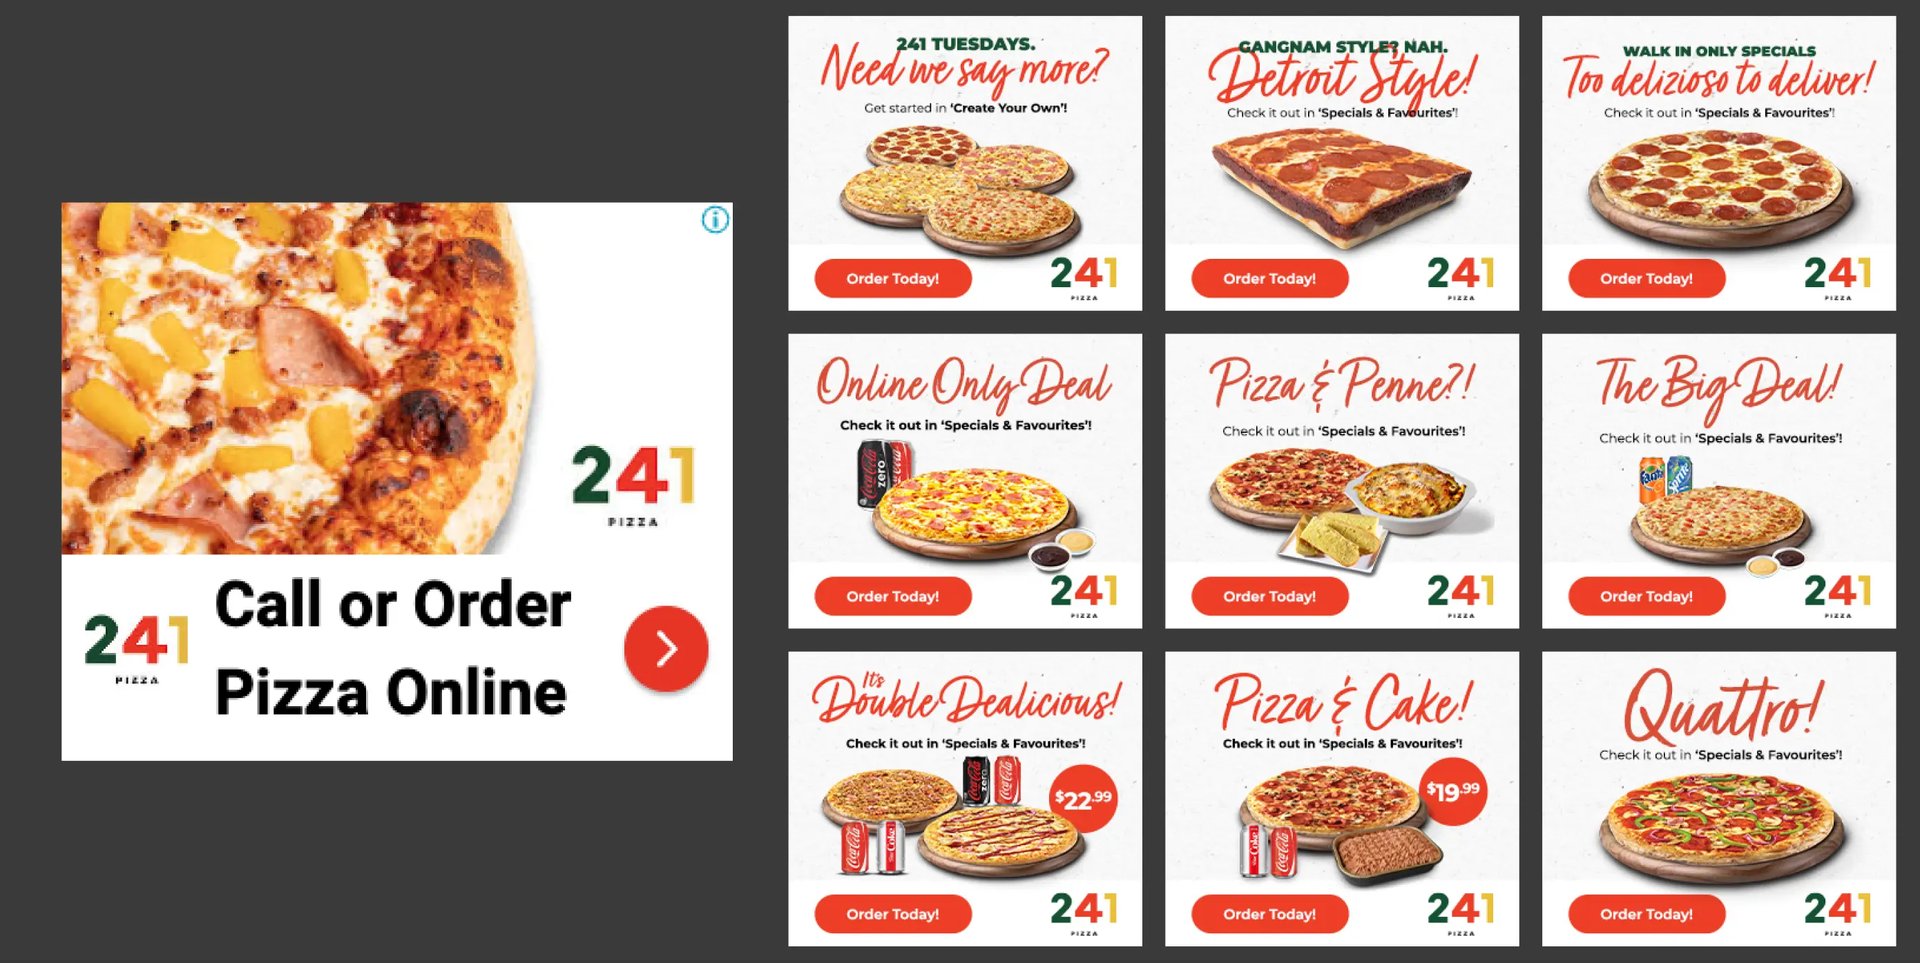 A side-by-side comparison: on one side, a traditional digital display ad, and 4 similar ads with different creative and CTA’s